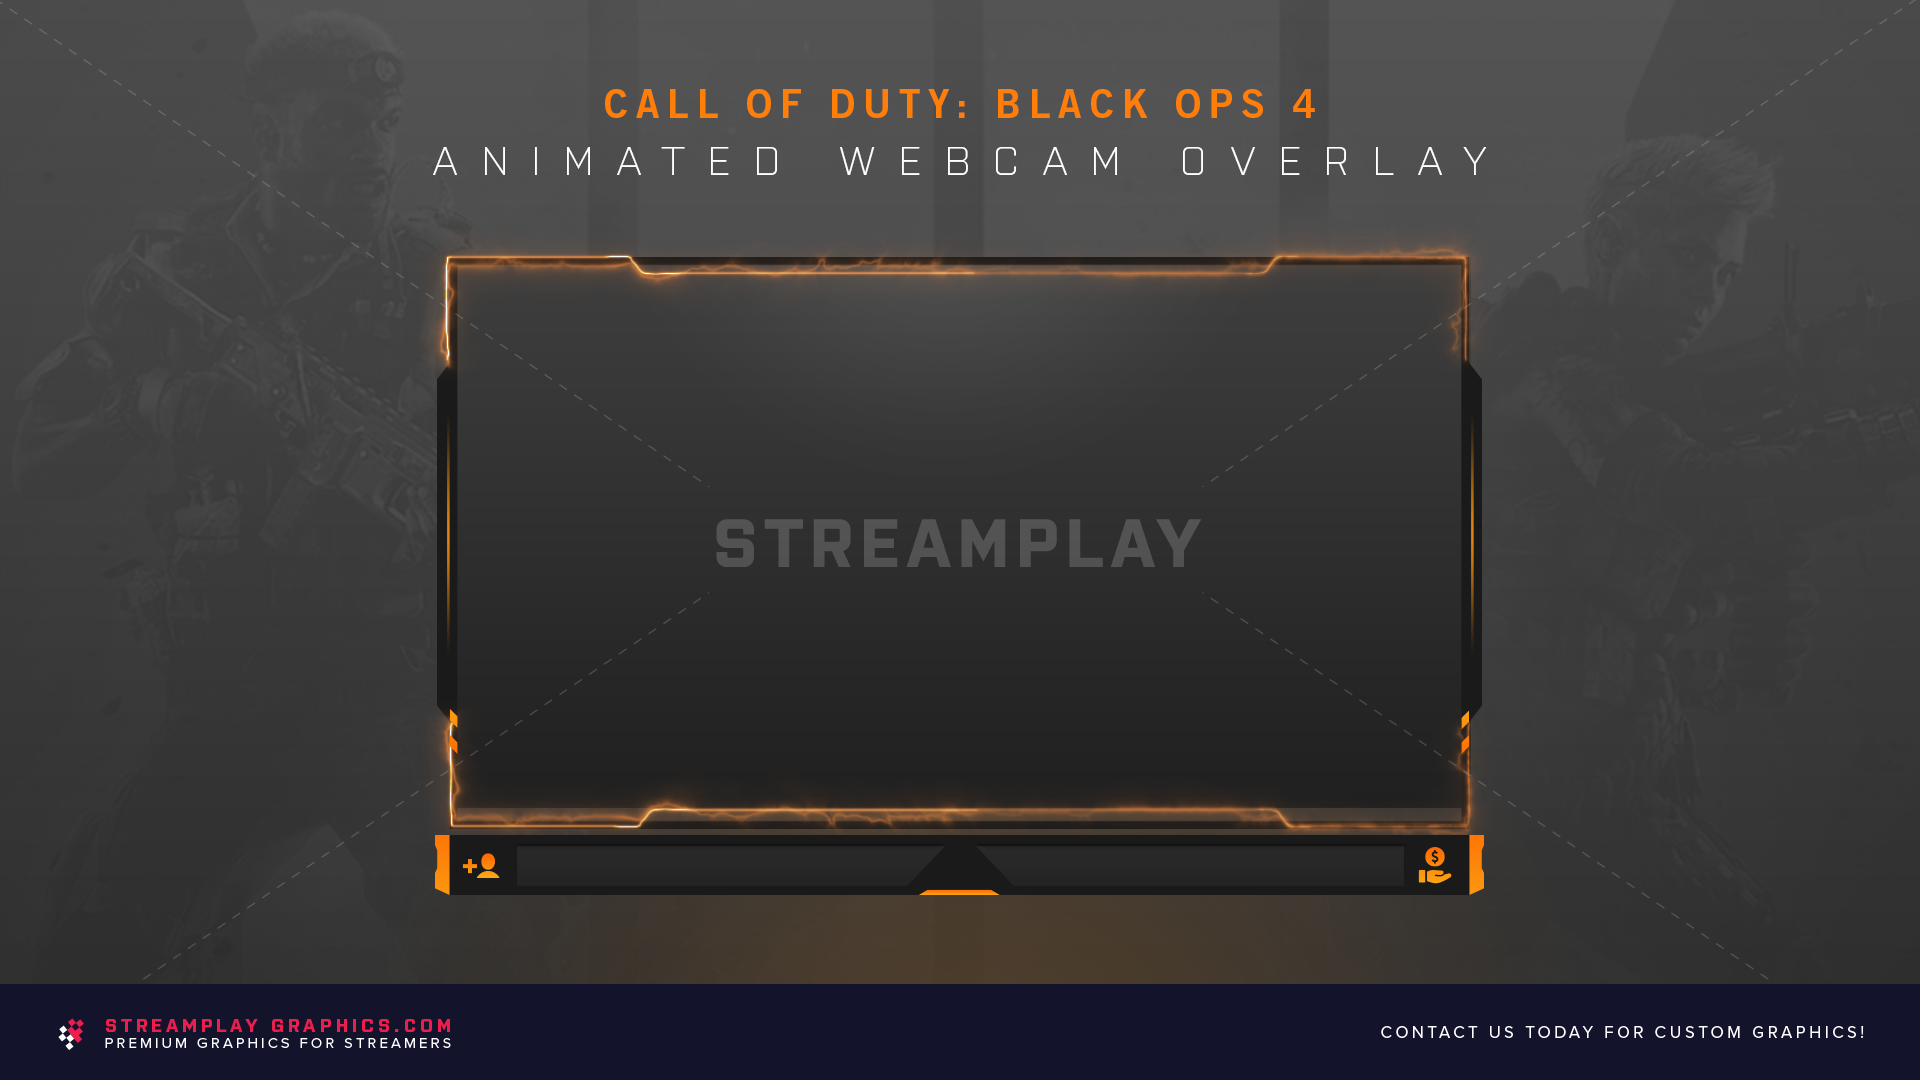 Call of Duty Black Ops 4 Webcam Overlay - Streamplay Graphics